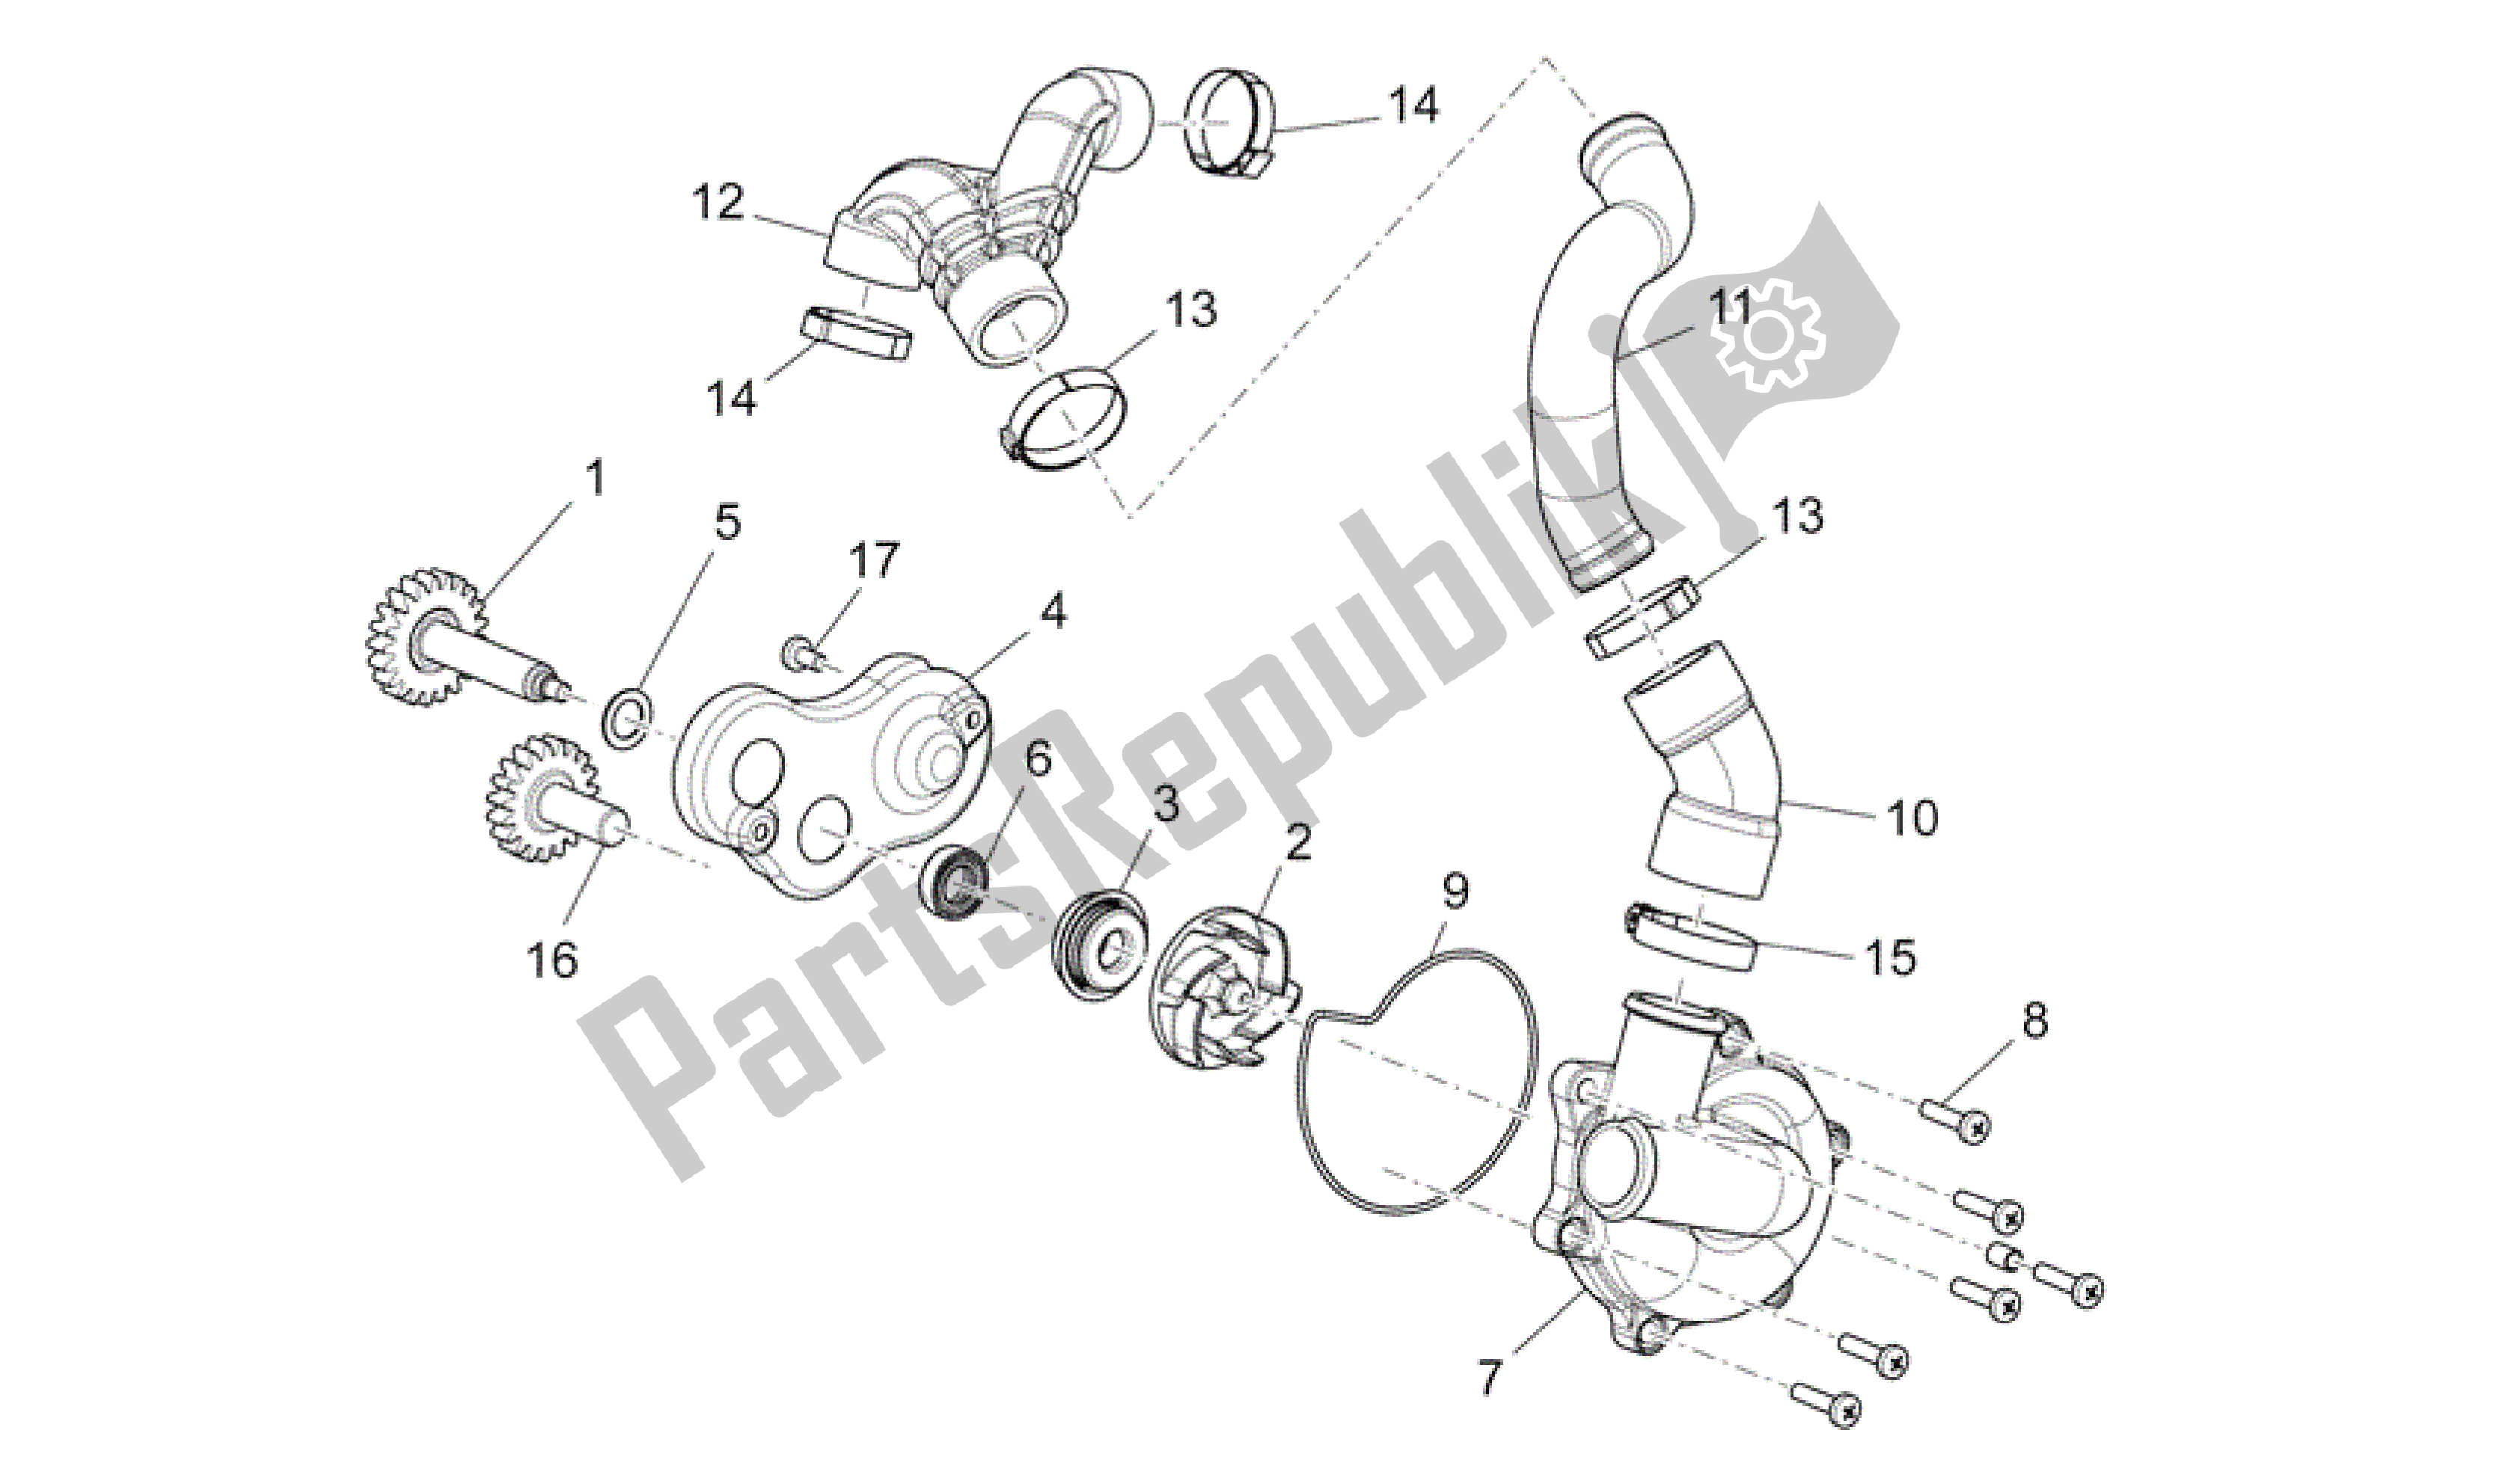 All parts for the Water Pump of the Aprilia Mana 850 2007 - 2011